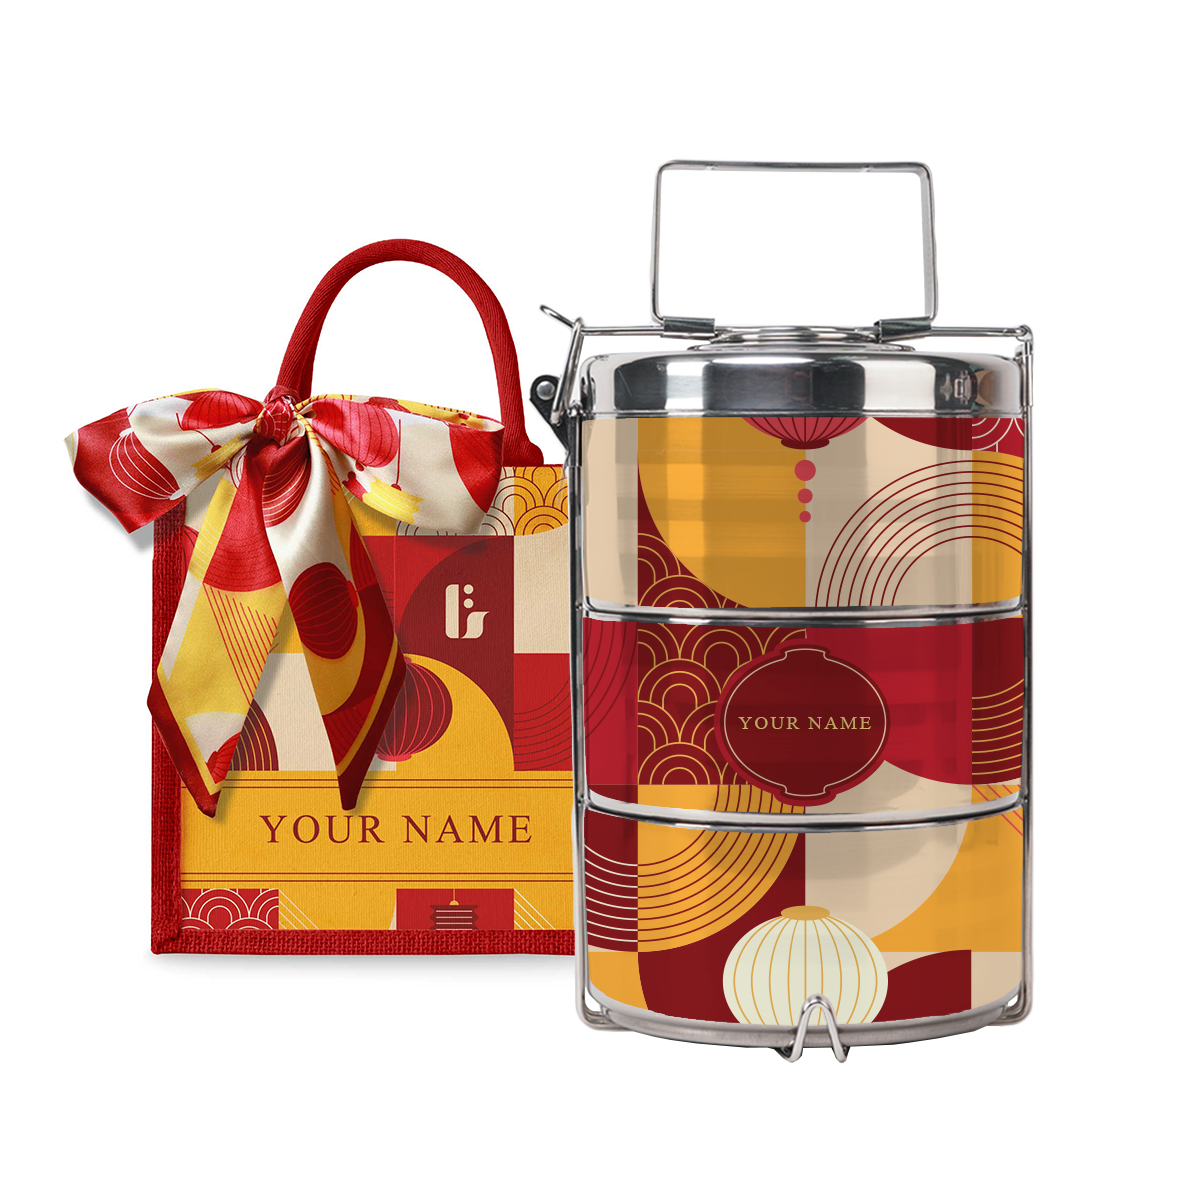 Lunar Blessing (Red Design) - Lunch Tote Bag with Three-Tier Tiffin Carrier